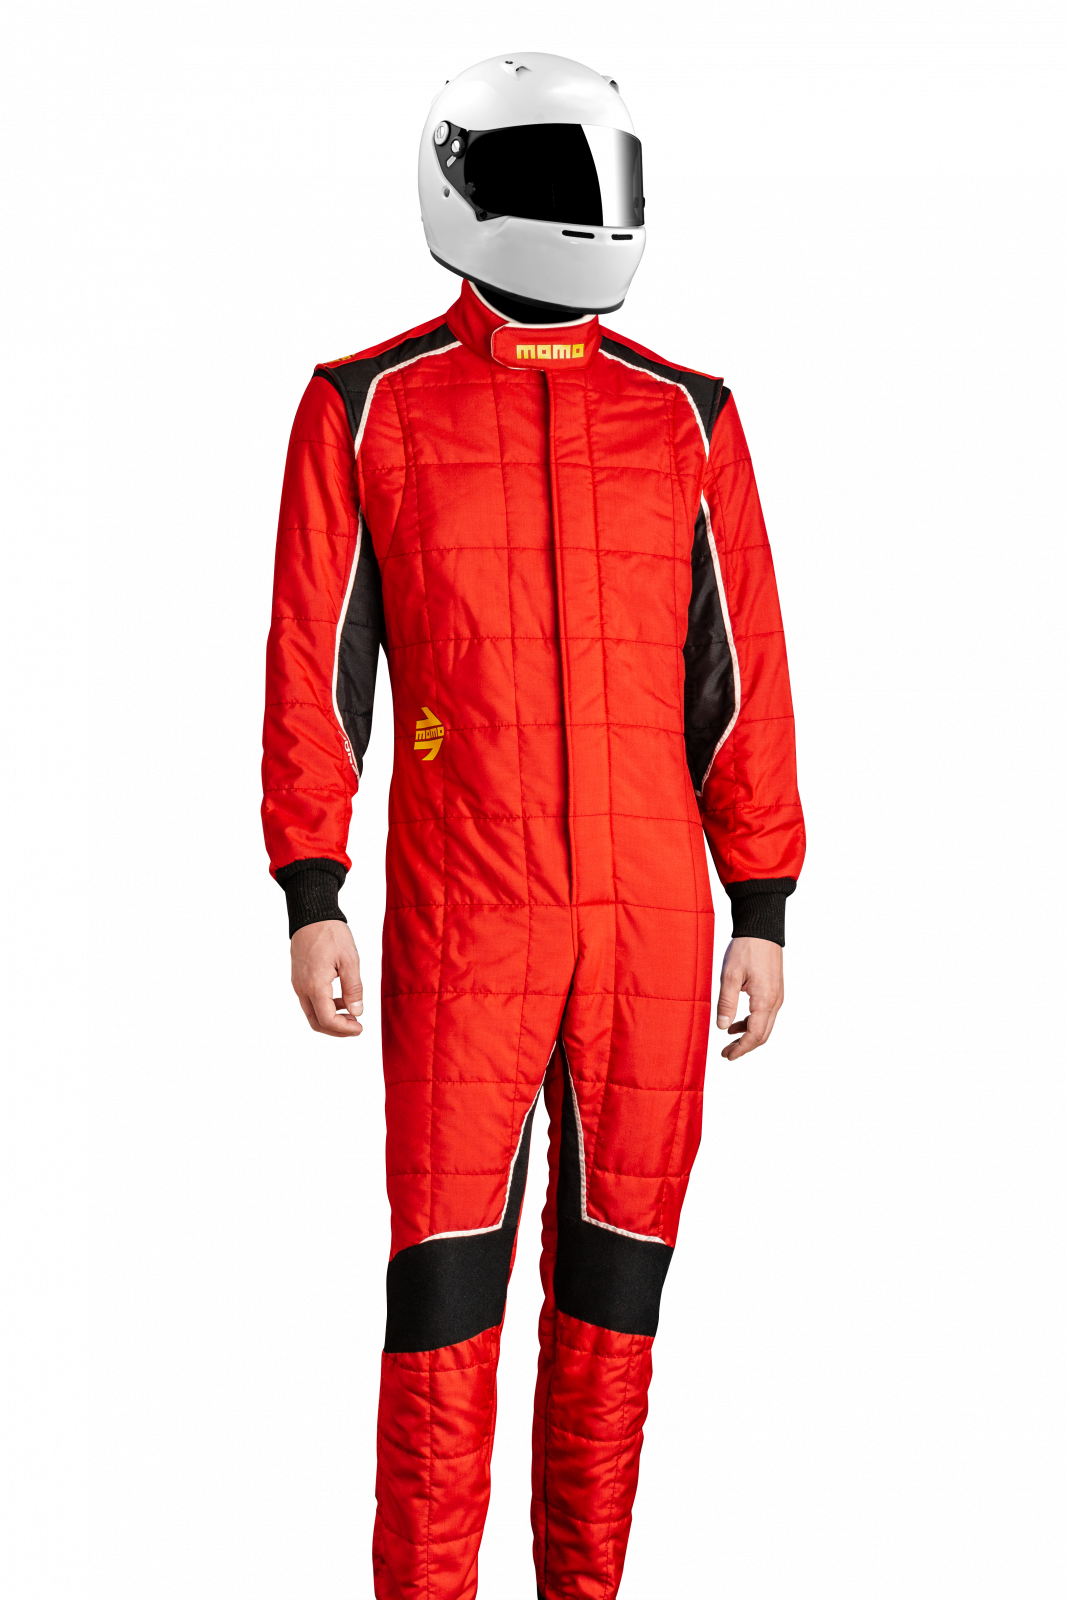 MOMO Corsa Evo Red Size 58 Racing Suit TUCOEVORED58